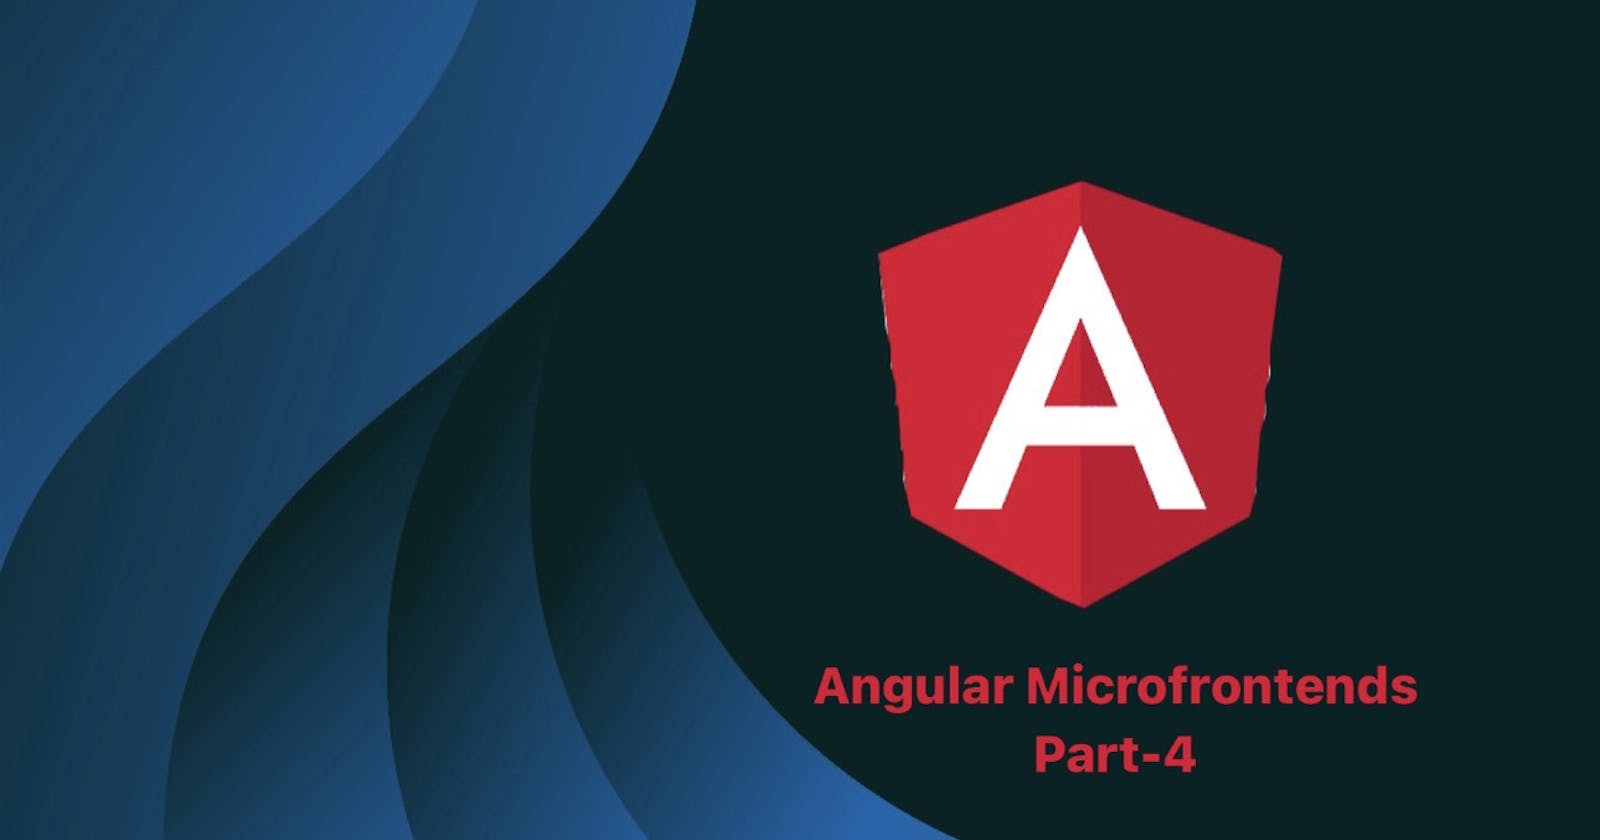 Part 4: Advanced Topics and Best Practices in Angular Microfrontends